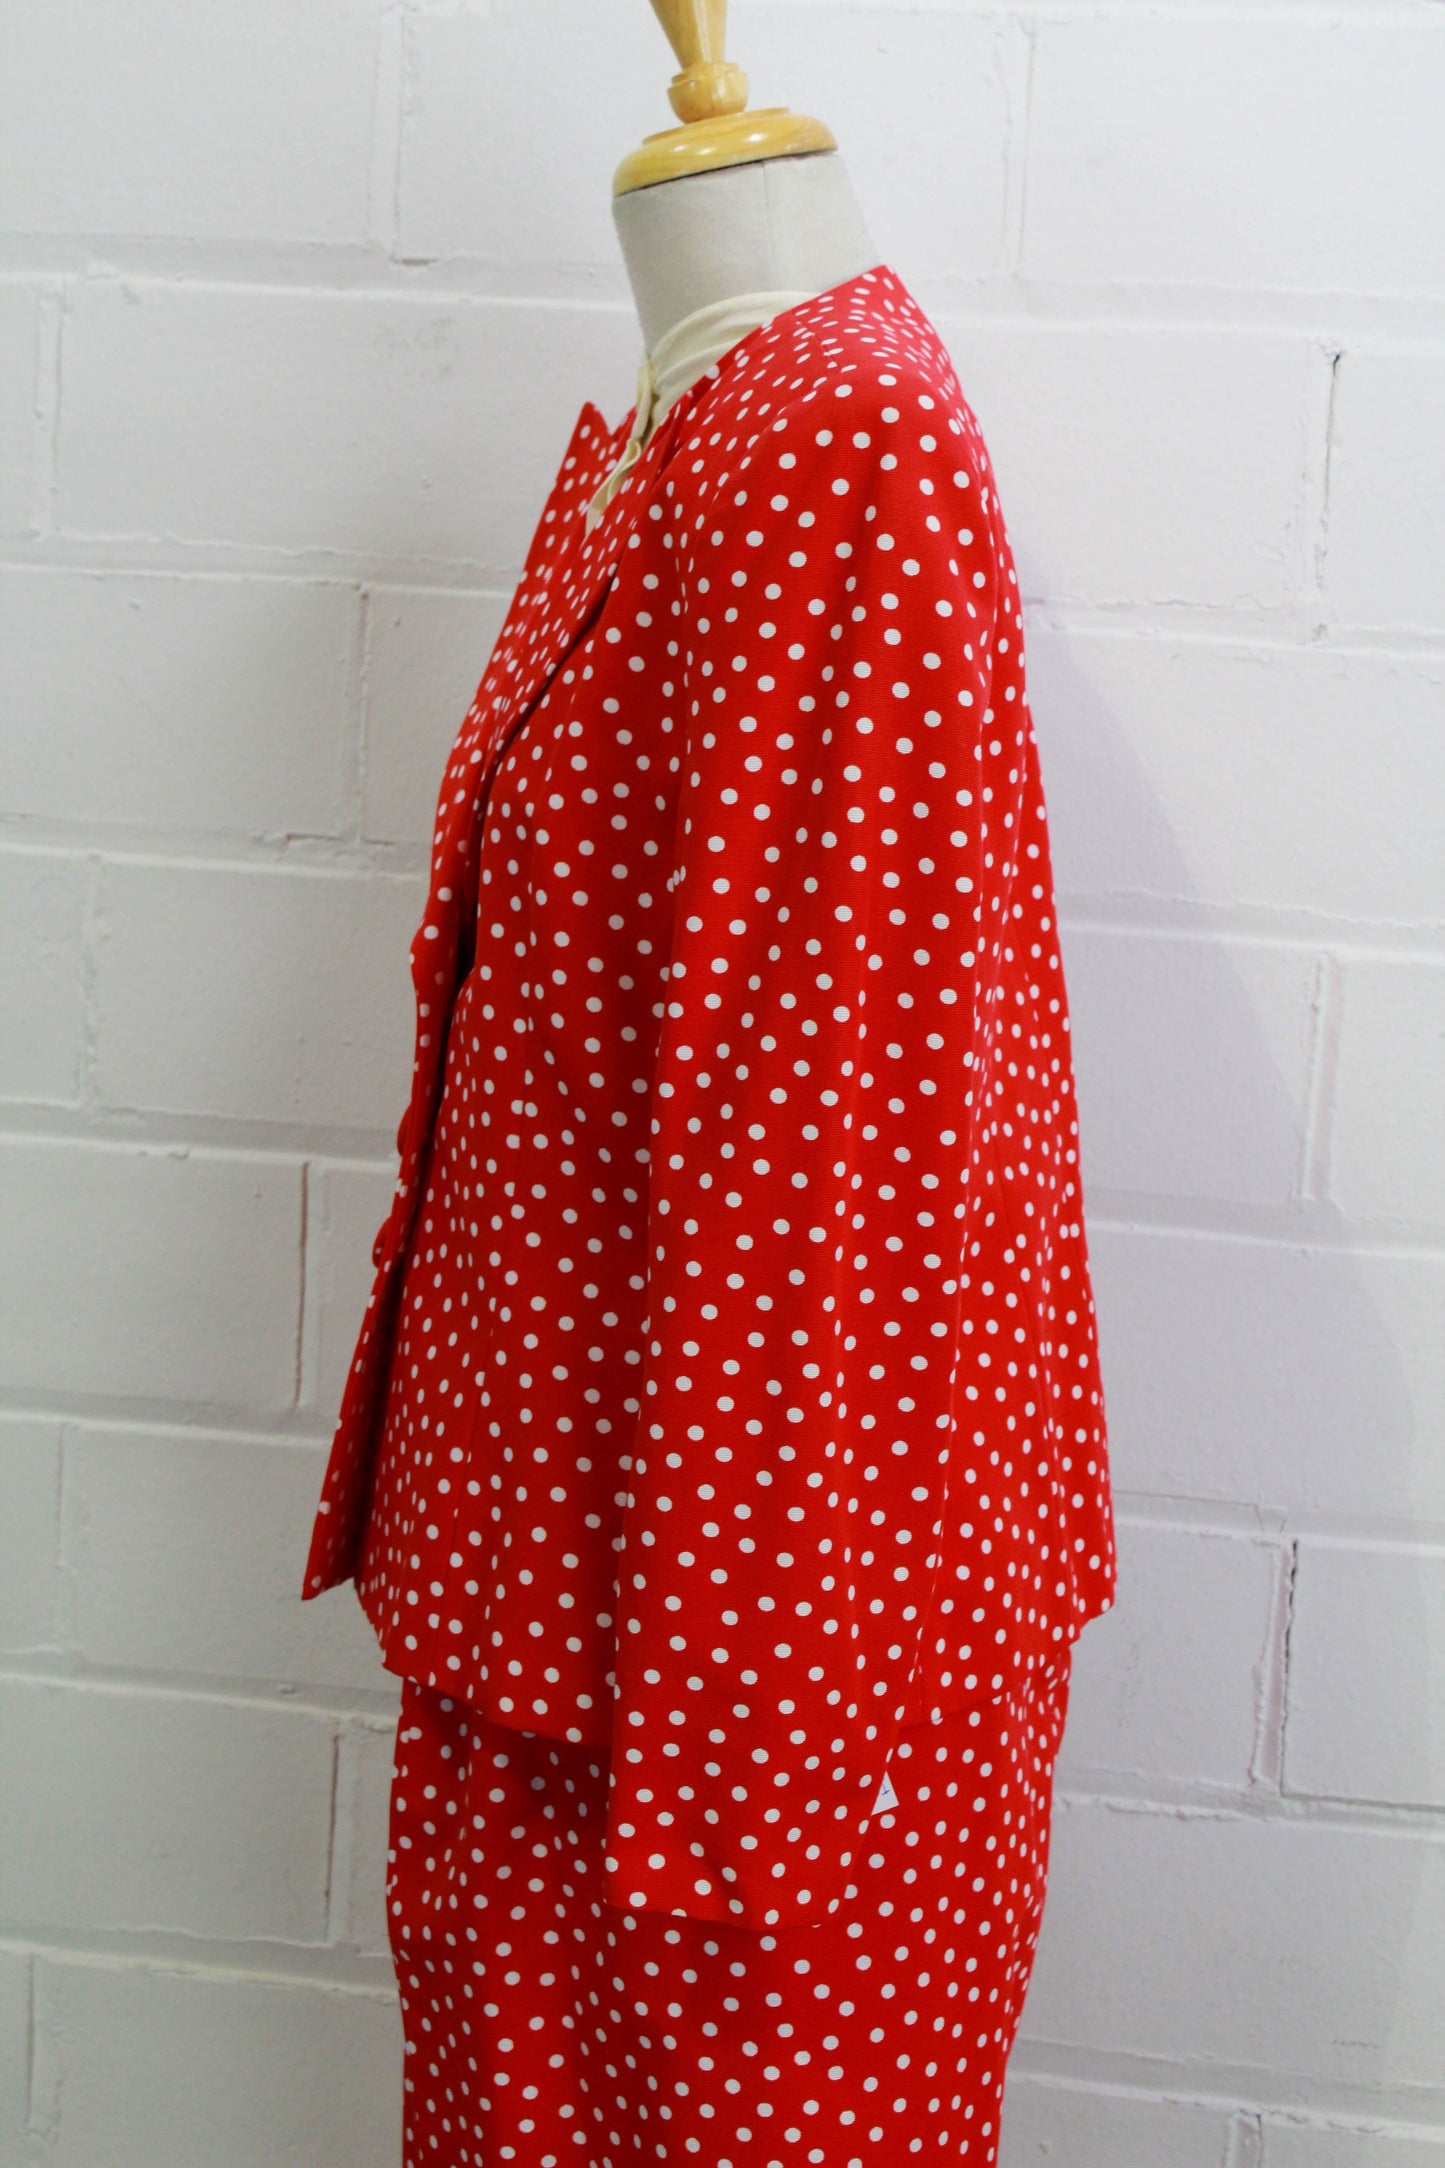 80s Ilie Wacs Red and White Polka Dot Skirt Suit, Medium